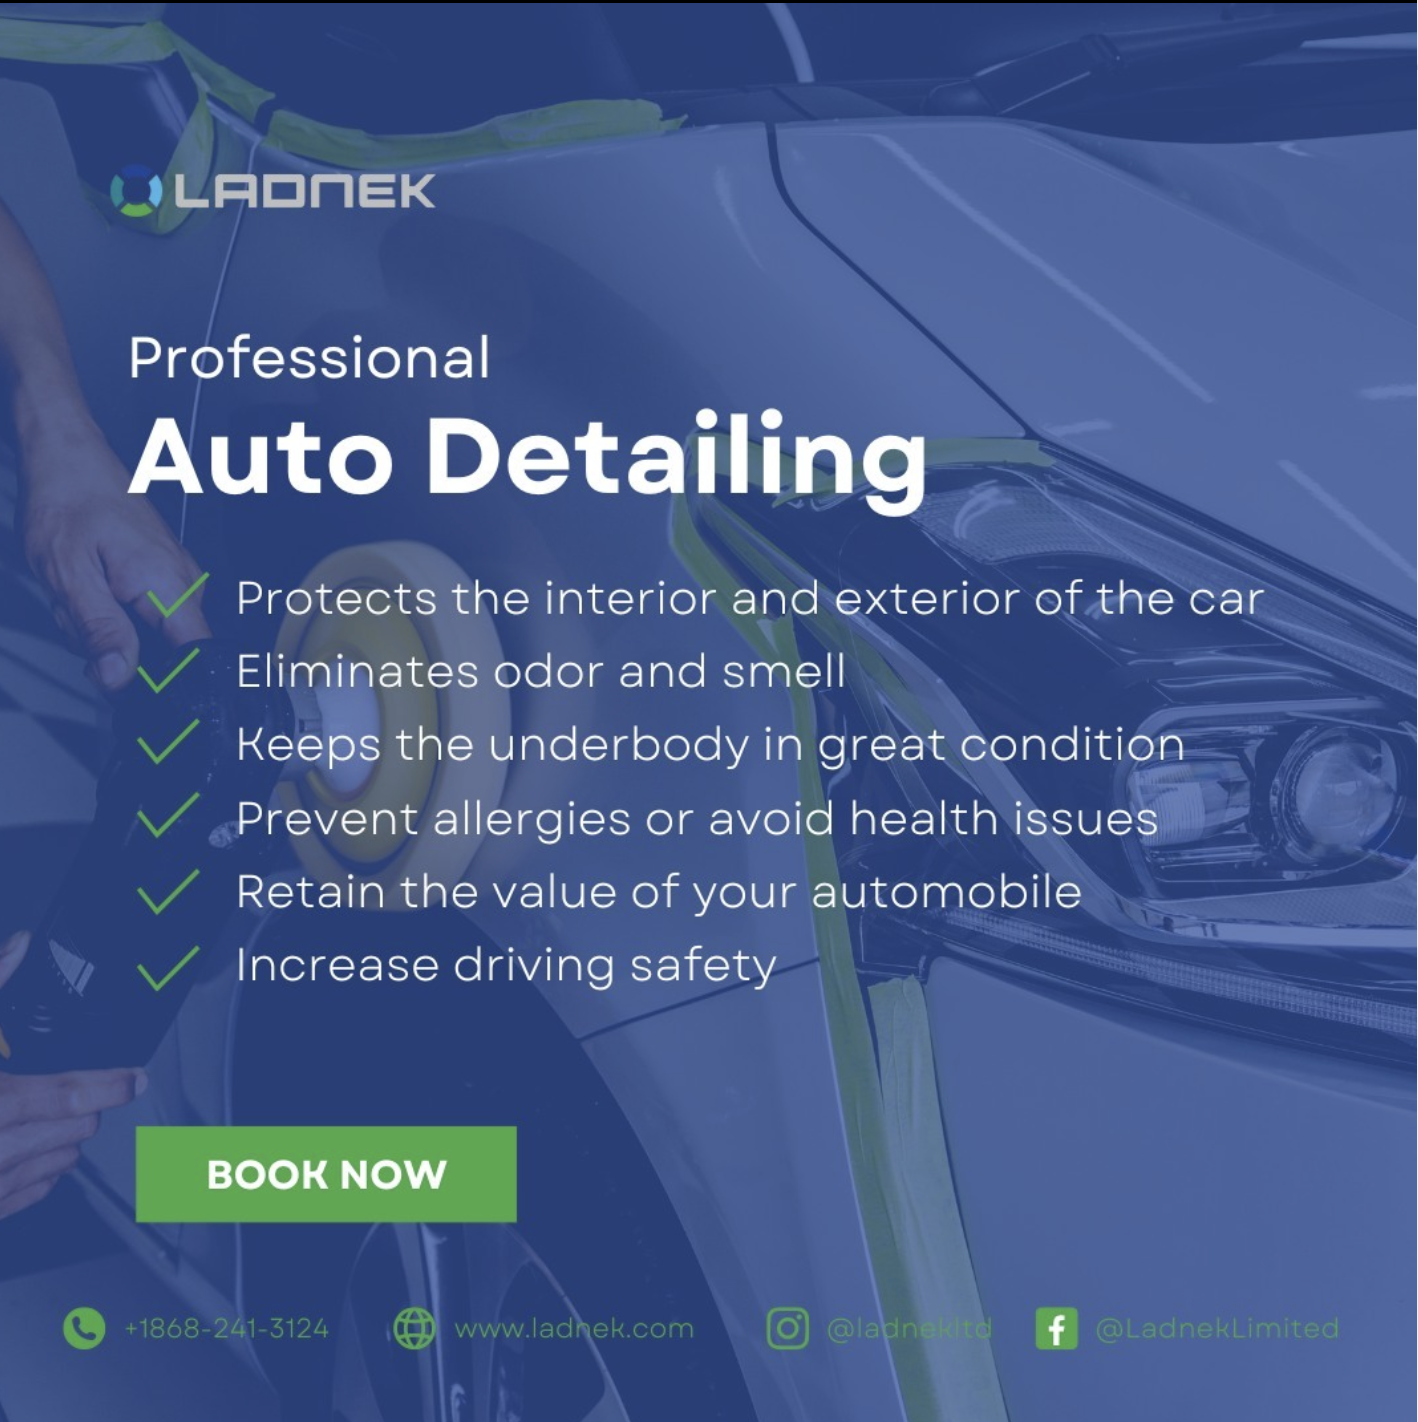 Auto detailing prevent allergies, eliminate odor and smell- ladnek